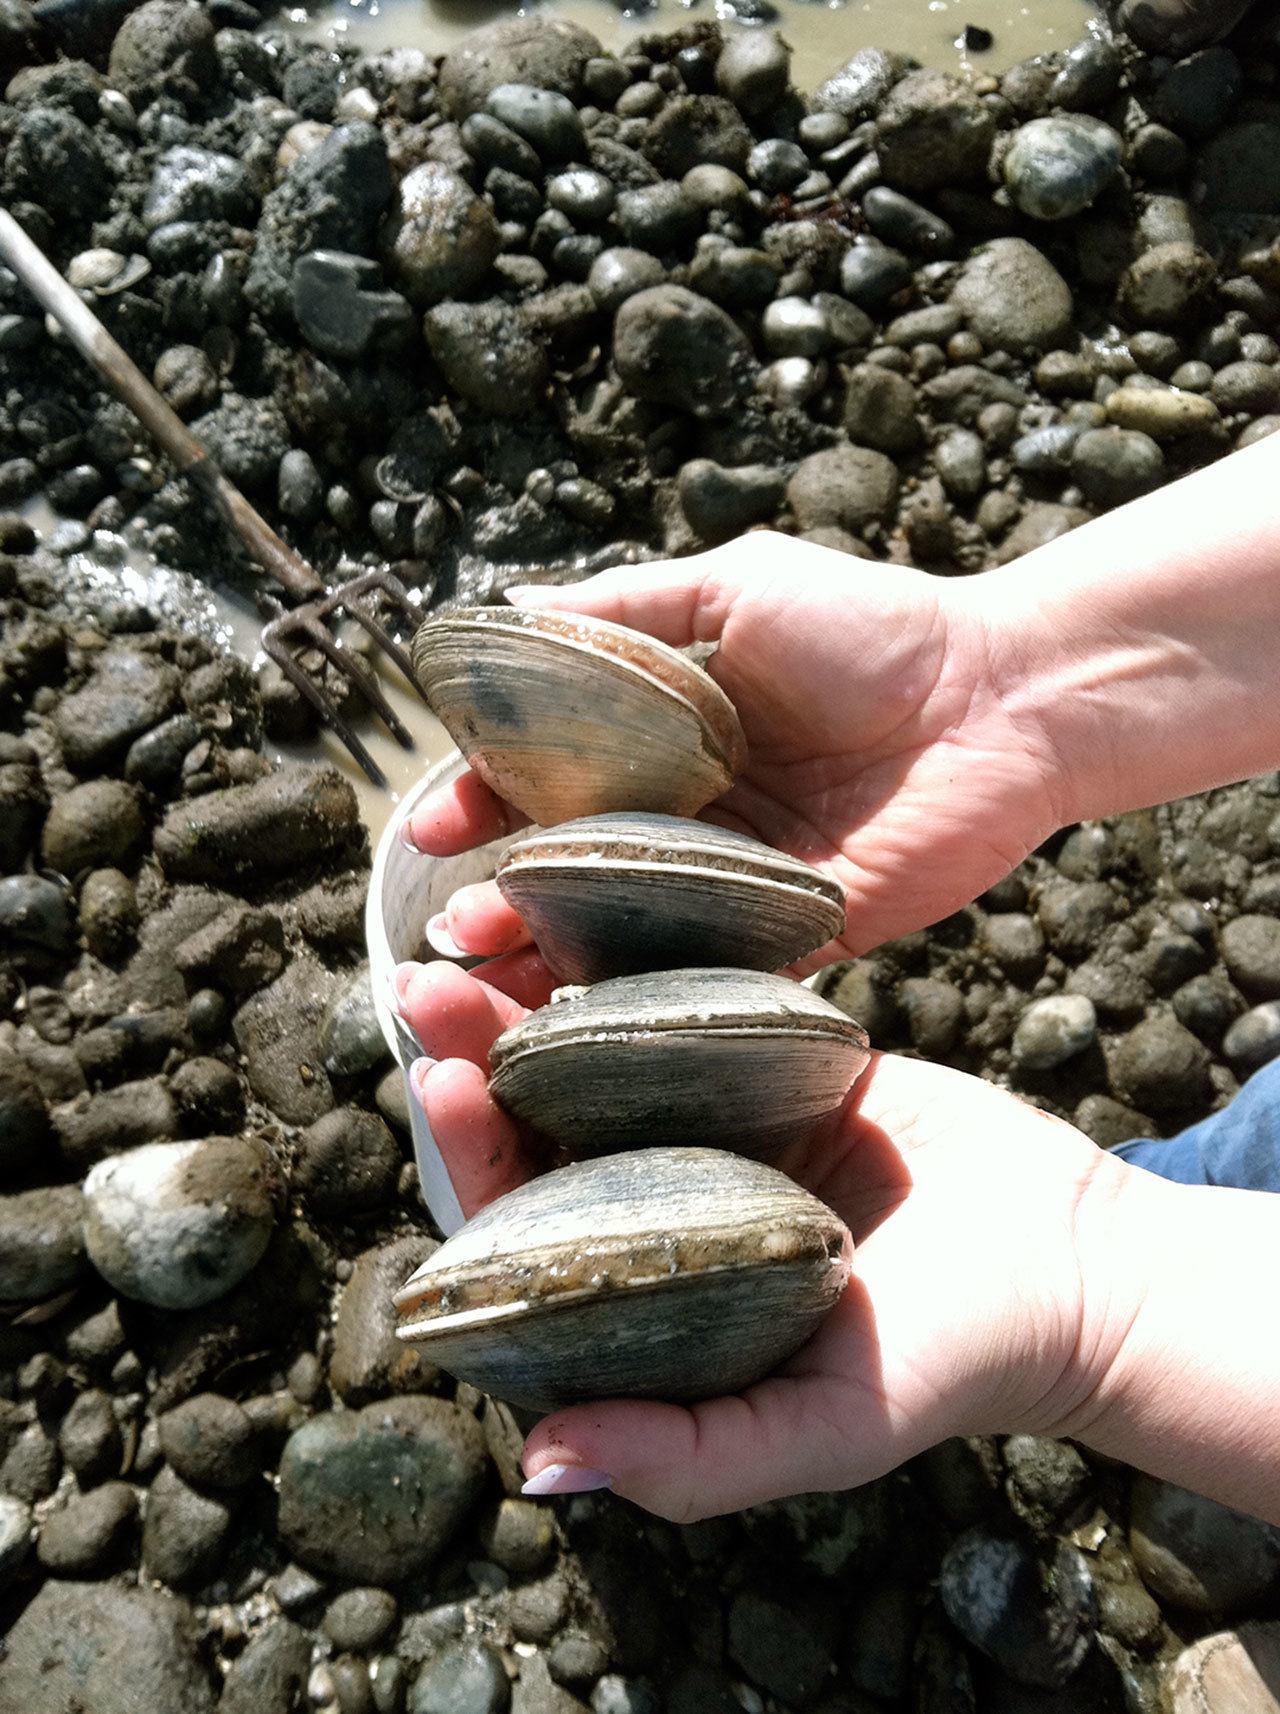 Salish Bounty co-curator Elizabeth Swanaset holds clams collected on a Puget Sound beach last summer. The clams were then smoked and preserved for winter use. (Warren King George)